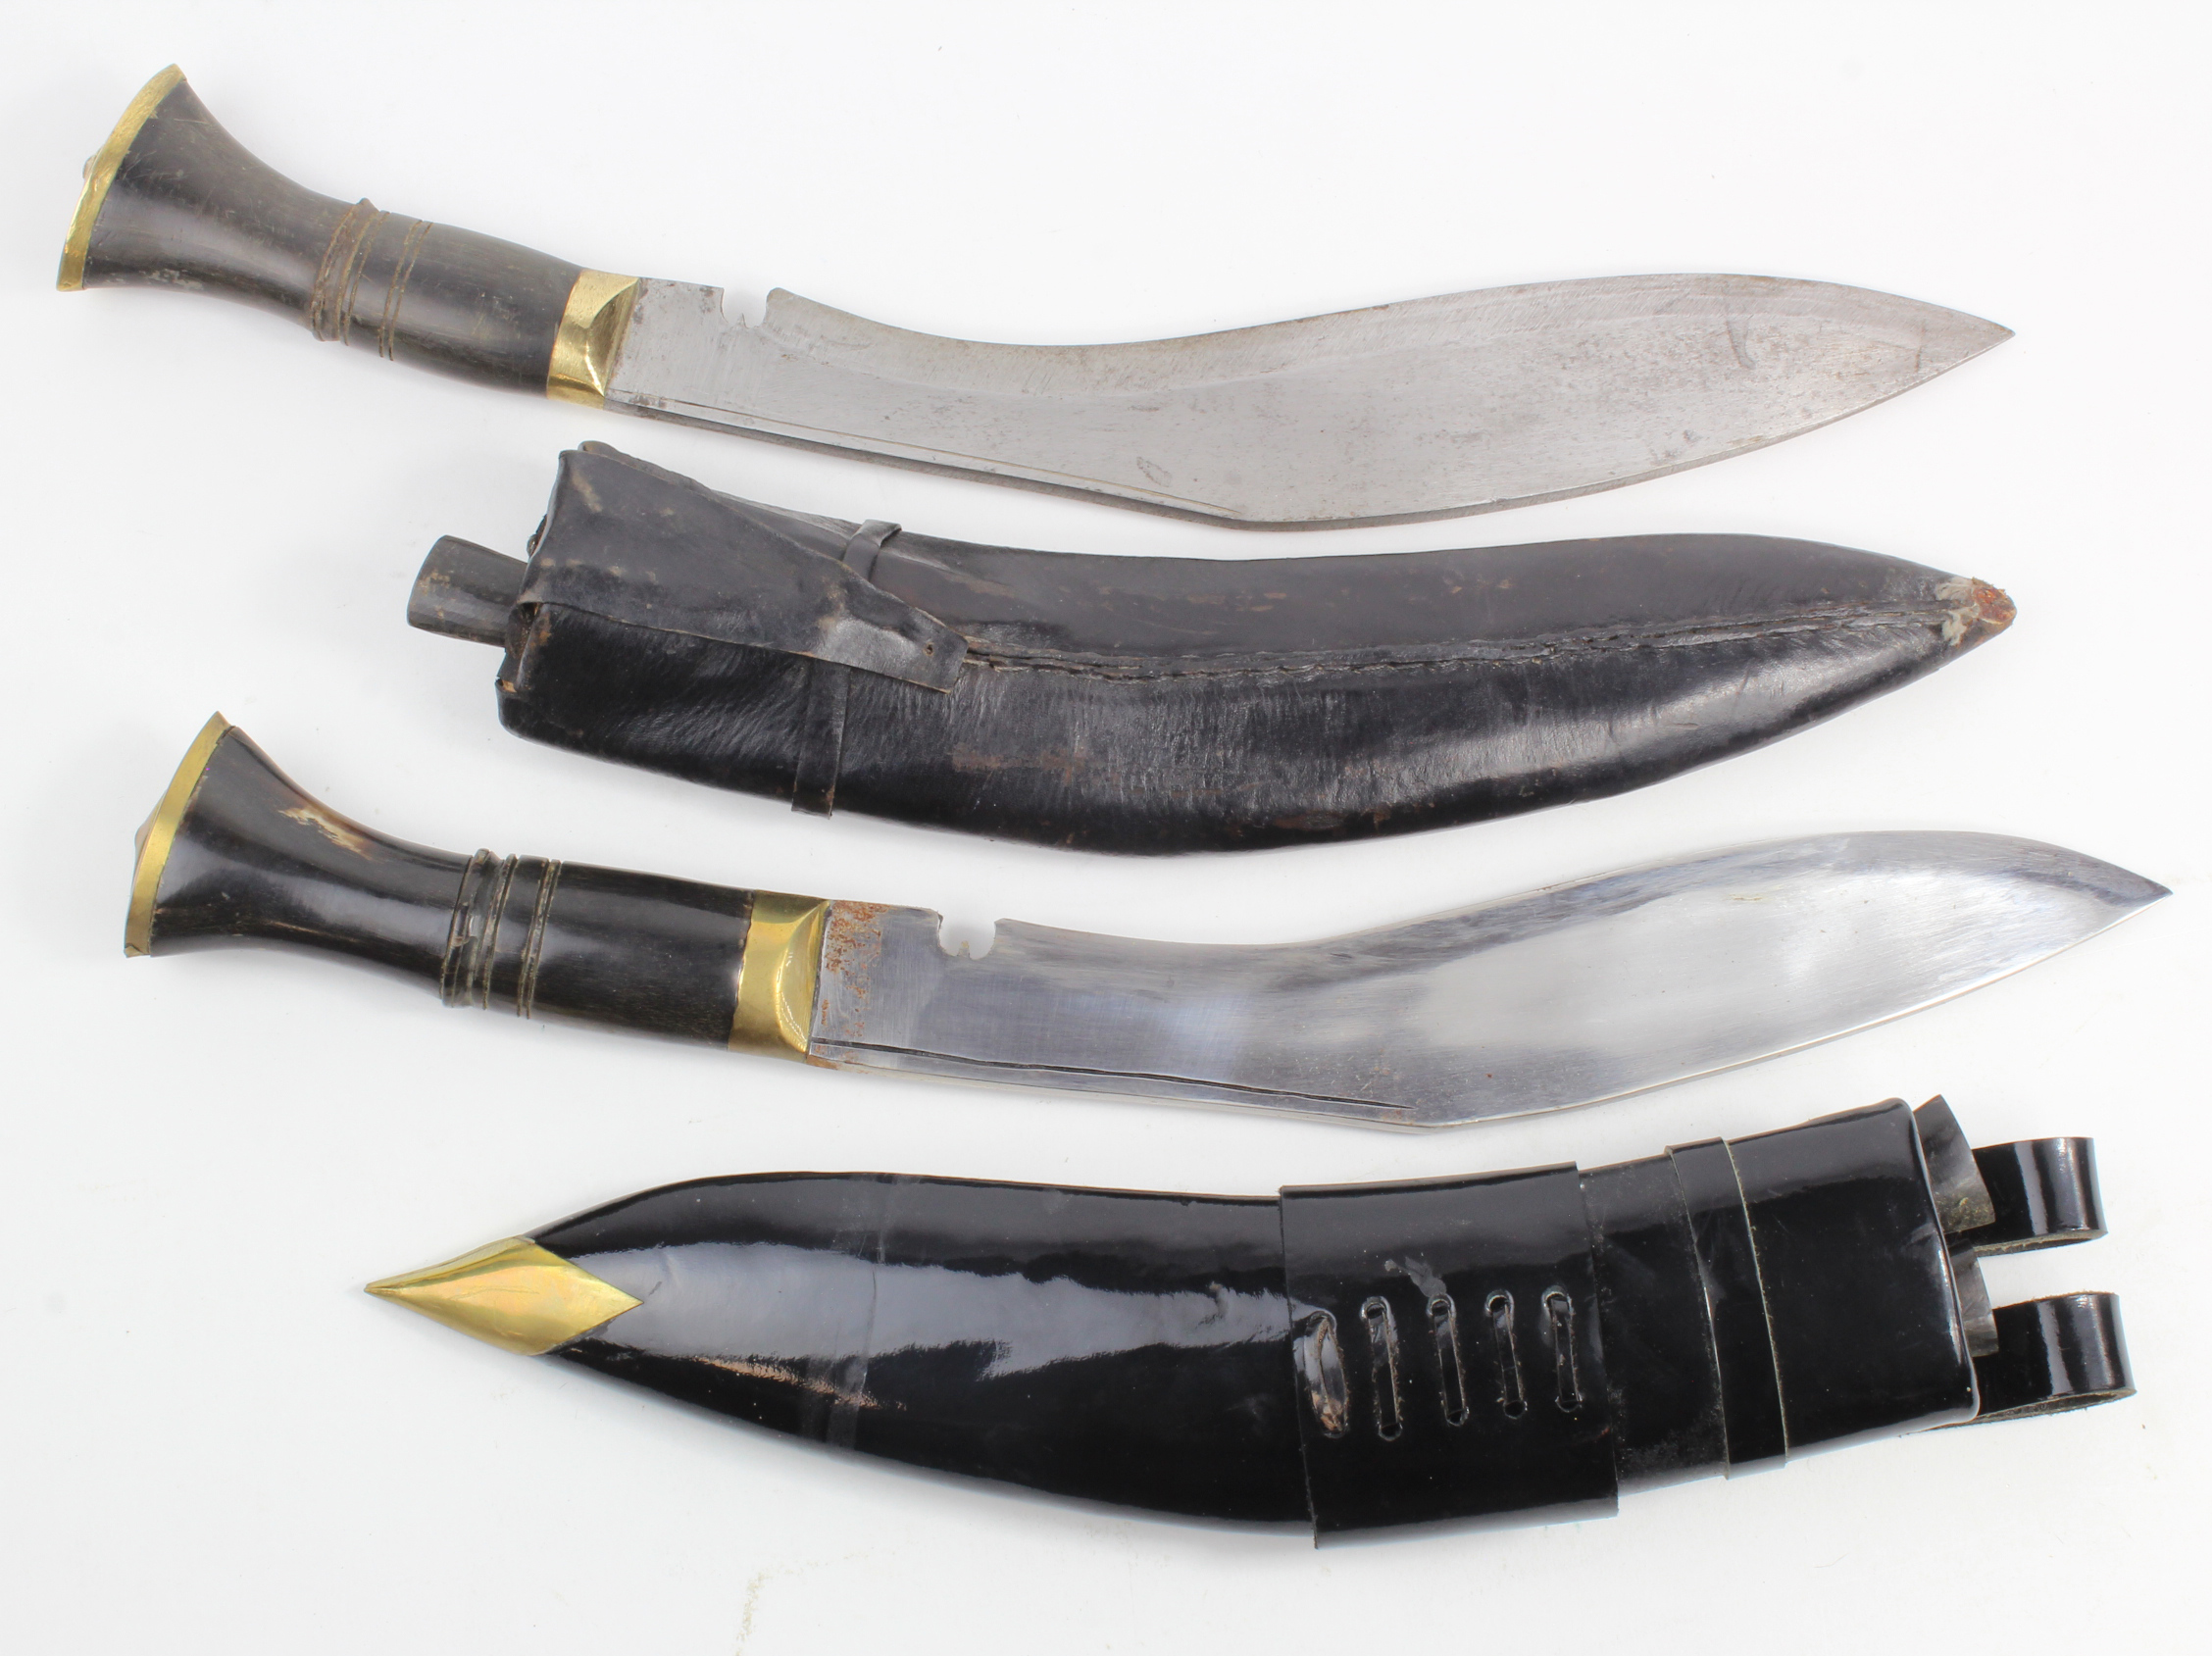 Kukris - tourist Kukris in their leather scabbards. One with two Knives (Chakmak and Karda) and